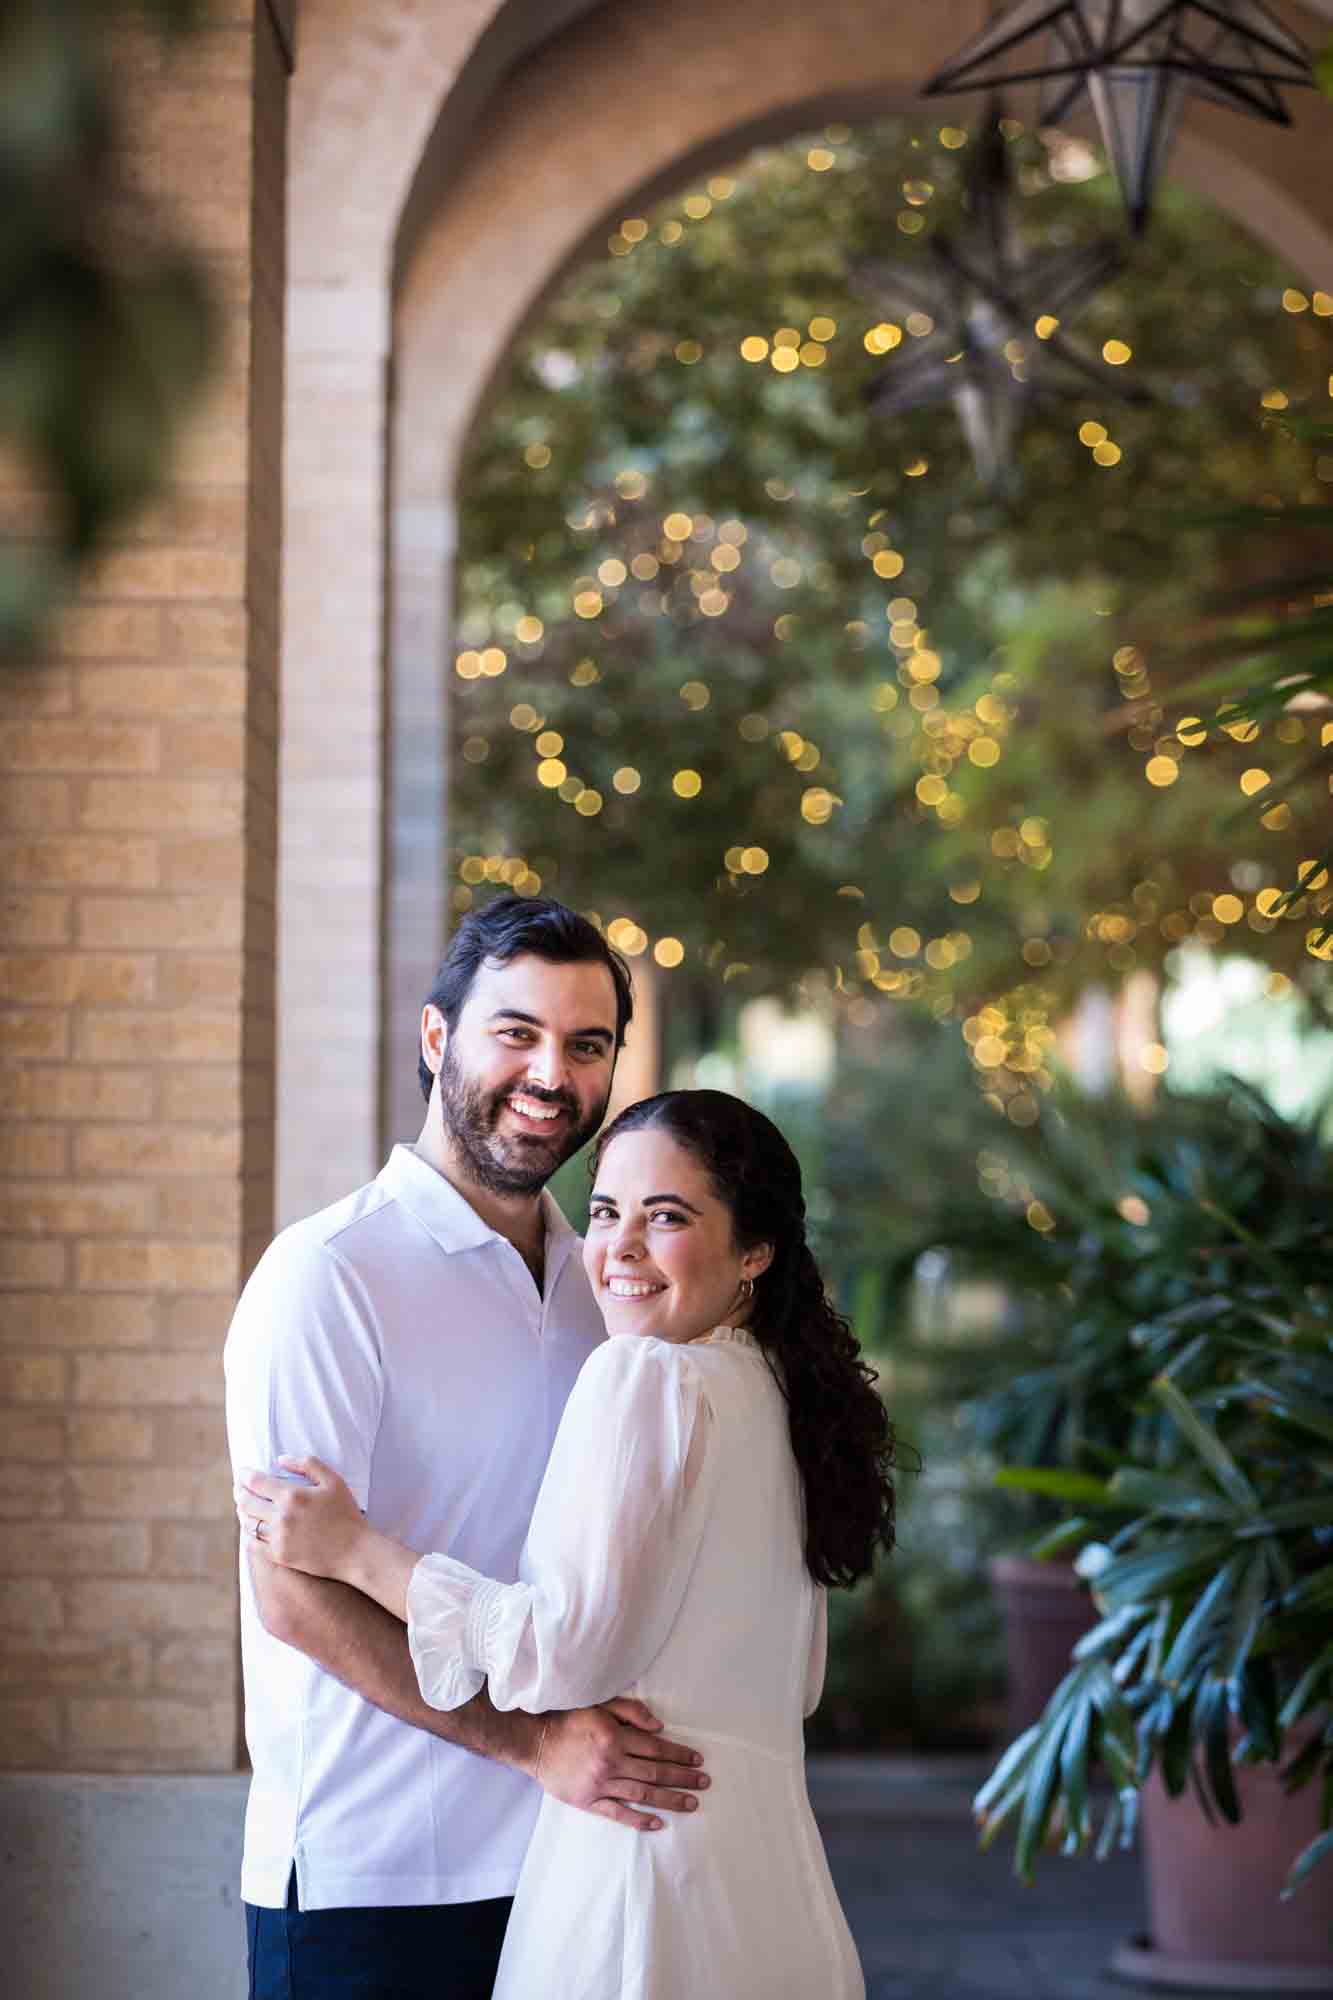 Couple hugging in brick patio by palm trees during a Pearl engagement portrait session